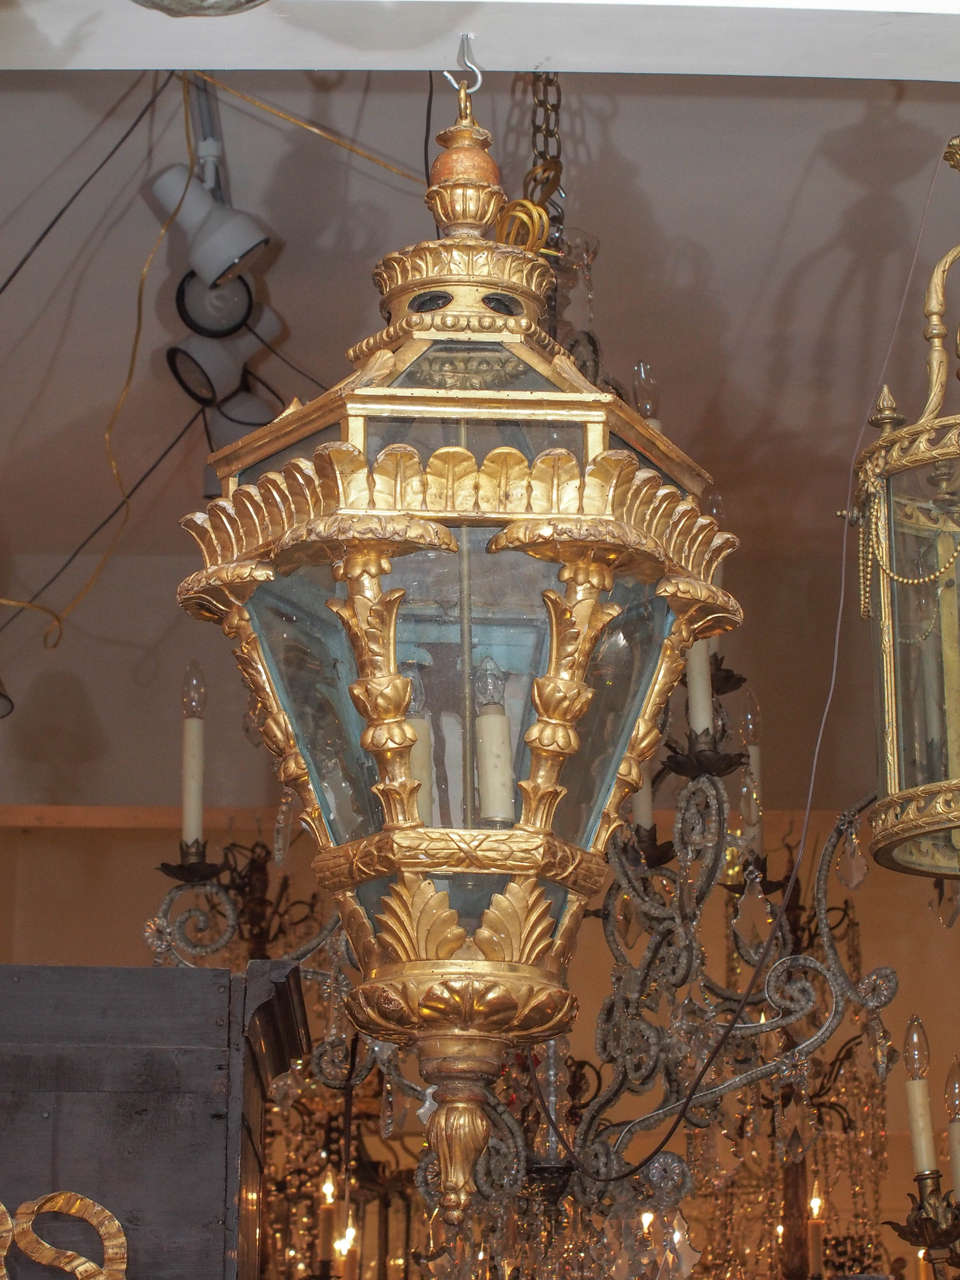 19th century giltwood and glass paneled Italian lantern. We re wired our fixtures and all come with canopy and chain. They are wired. We recommend that an electrician check them as wired can come loose during shipping.